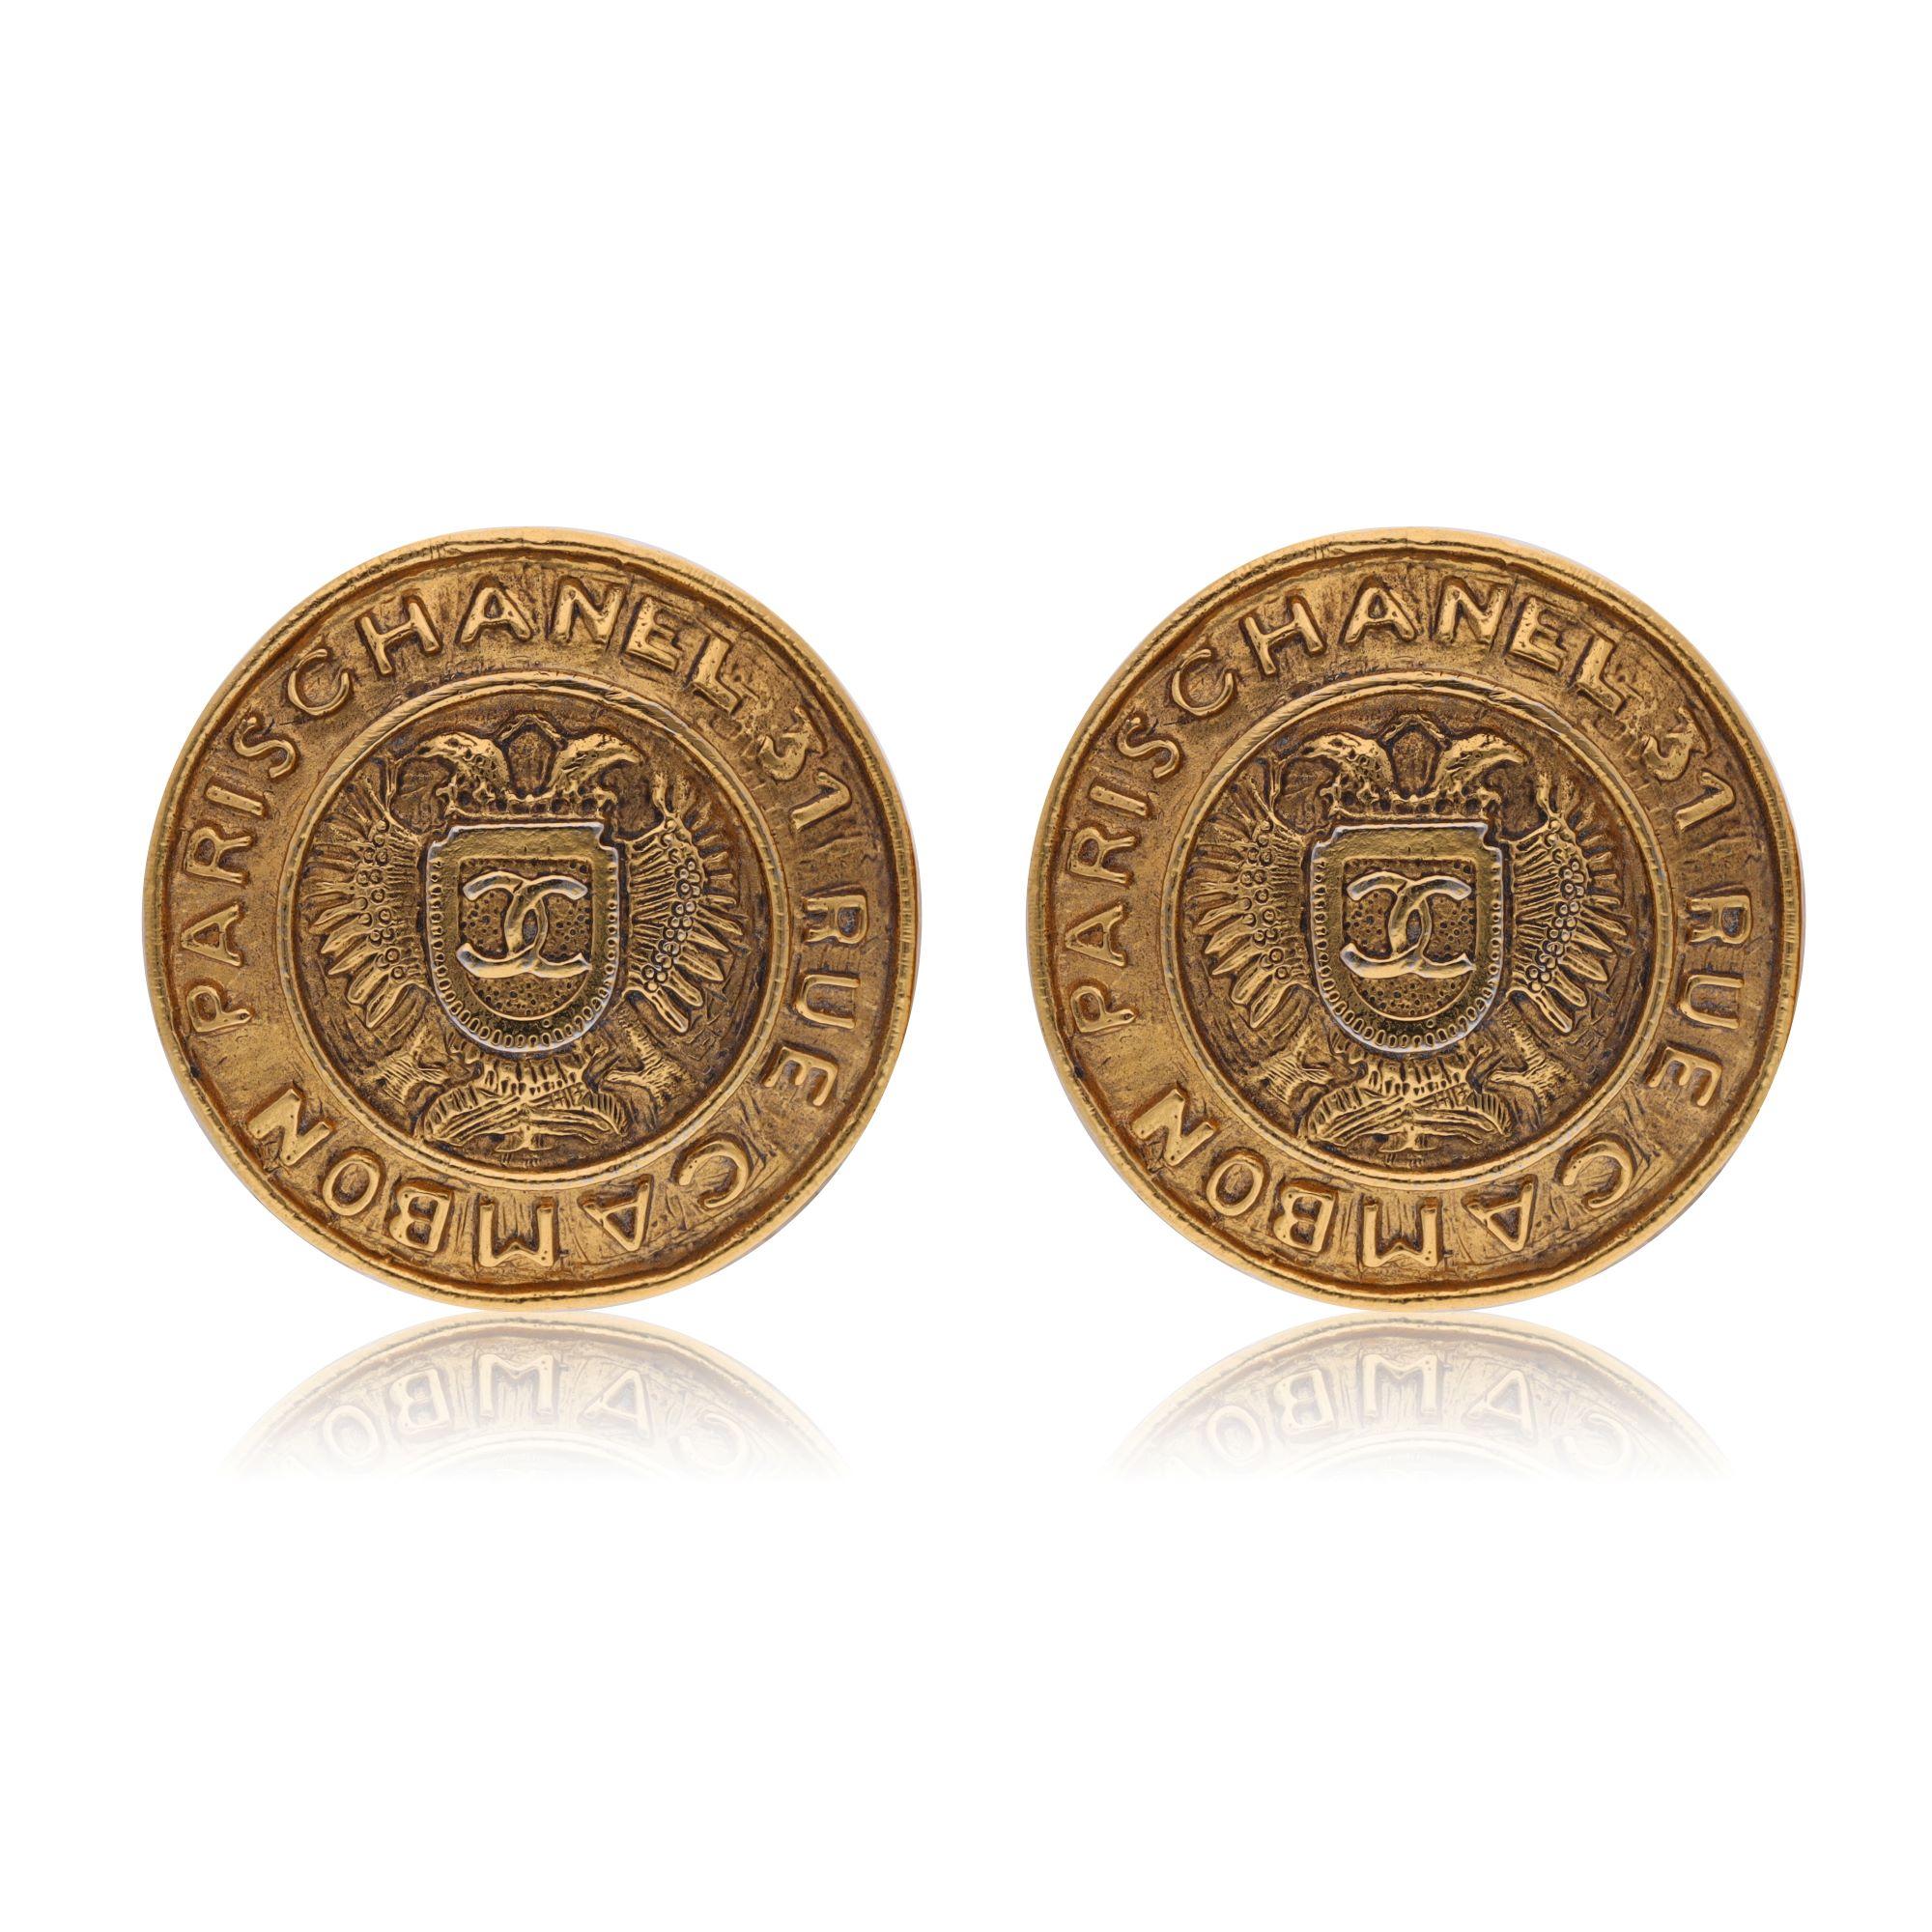 Vintage Chanel Rue Cambon Crest Earrings In Good Condition For Sale In Dubai, DU